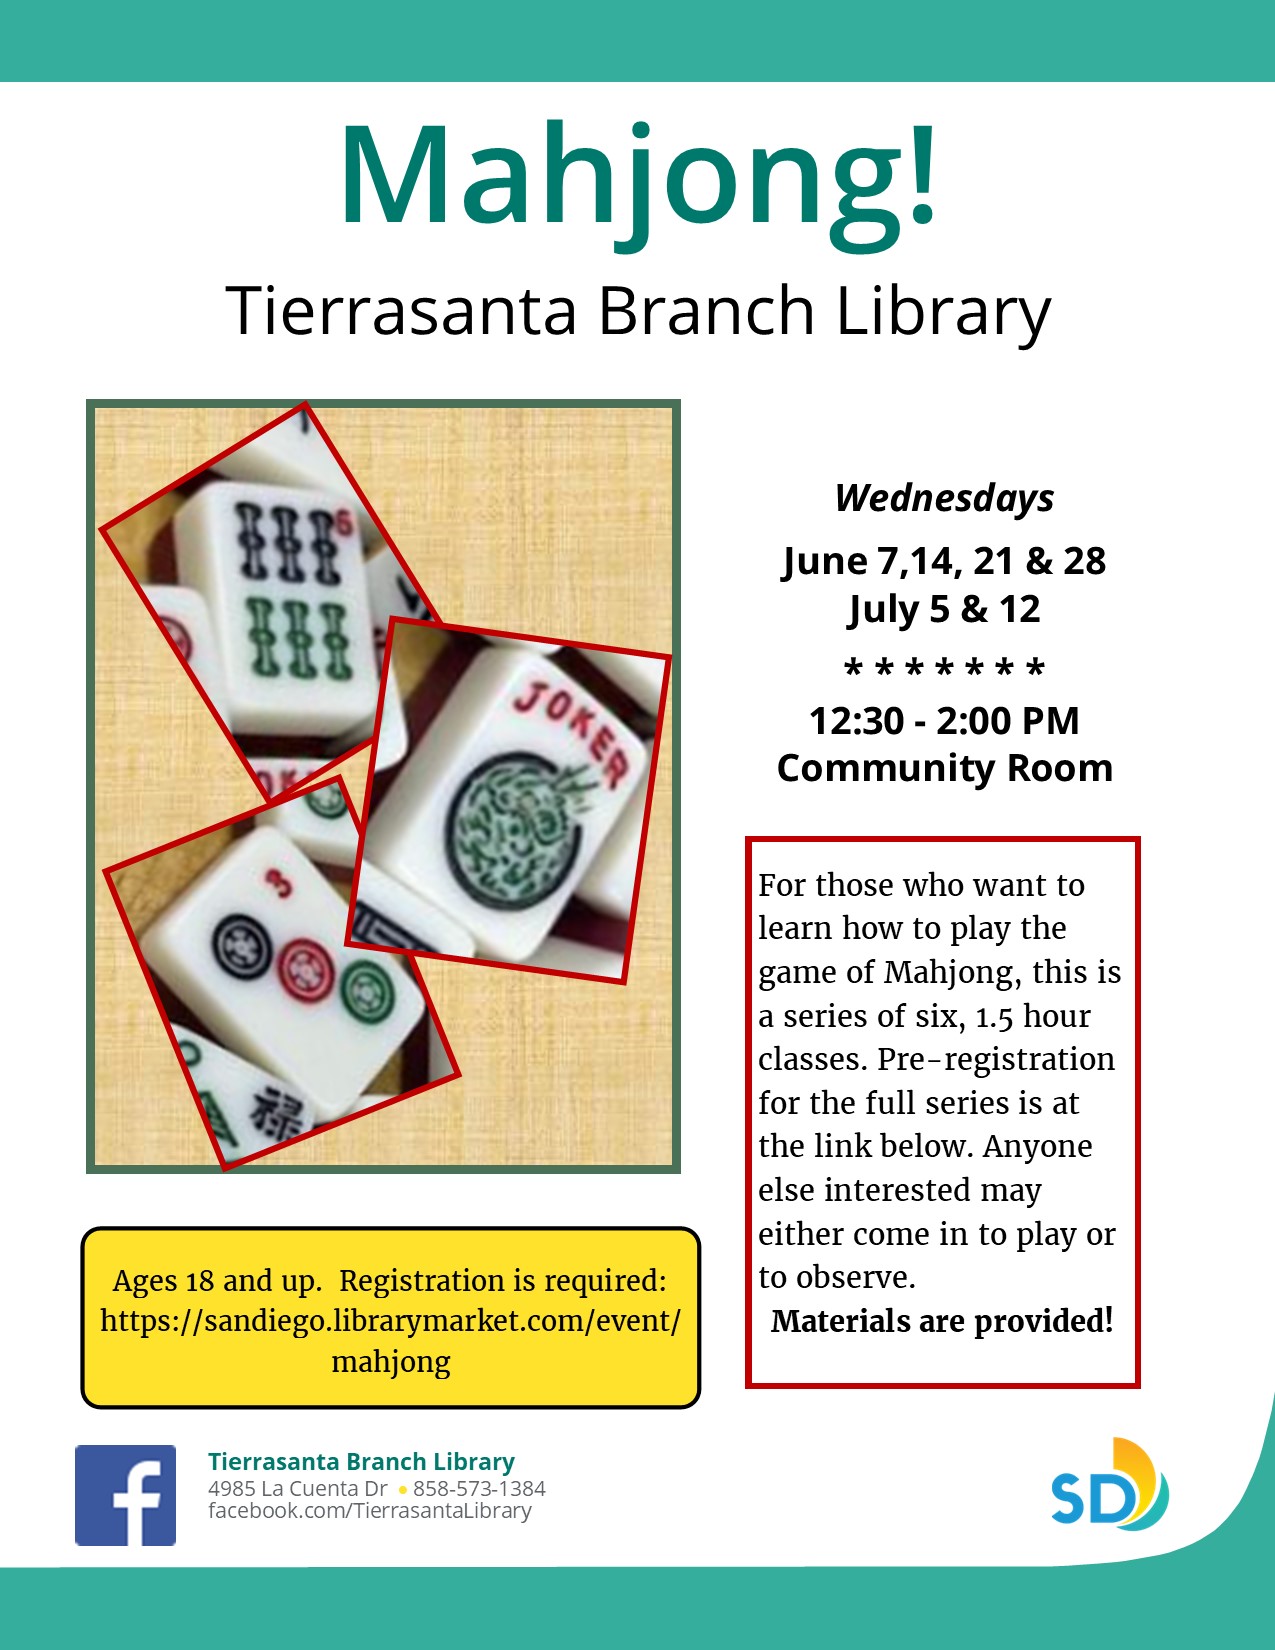 Flyer with the image of three mahjong tiles